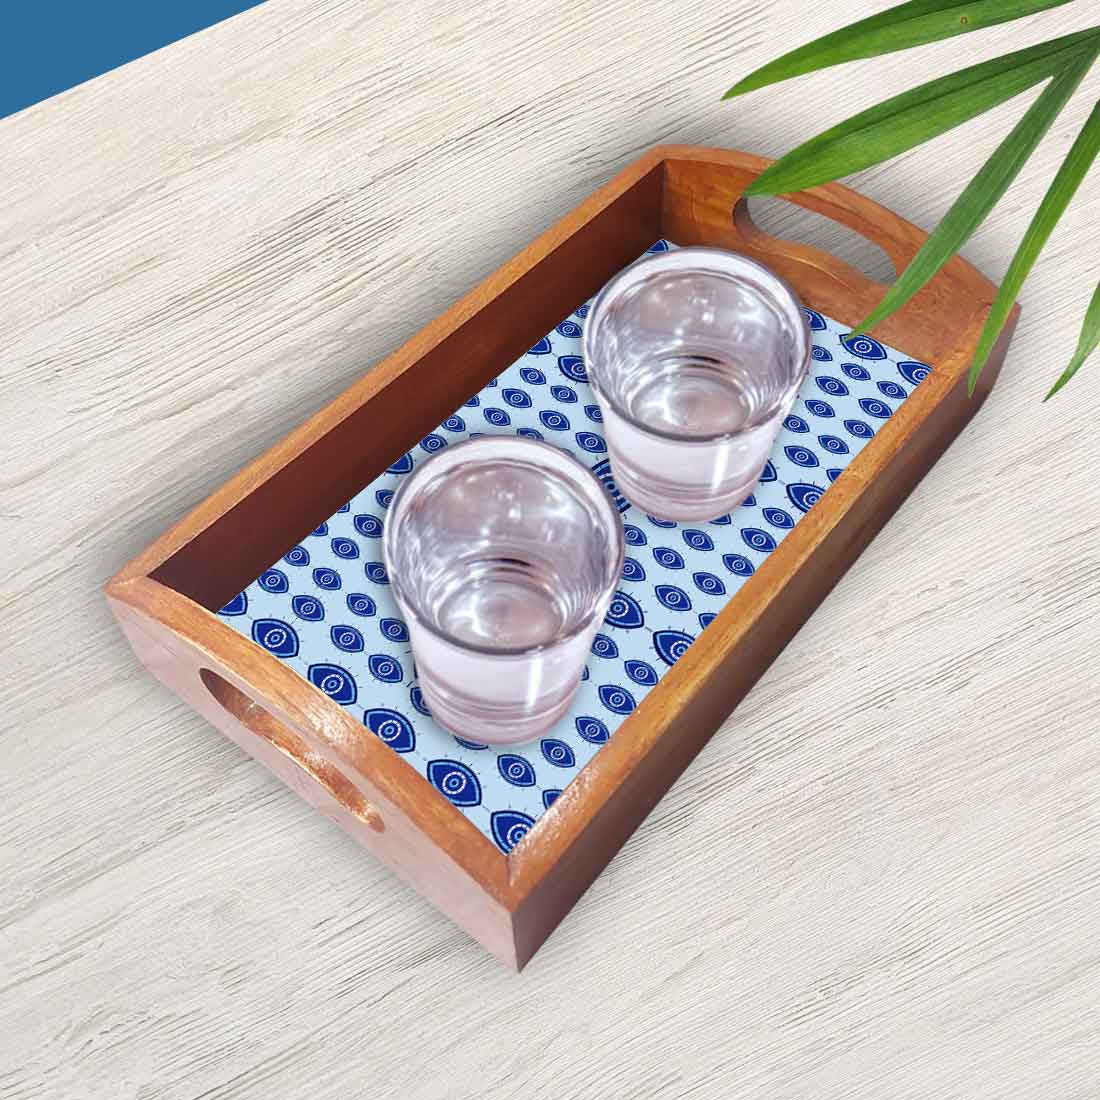 Designer Wooden Food Serving Plate Tray with Handle Set of 3